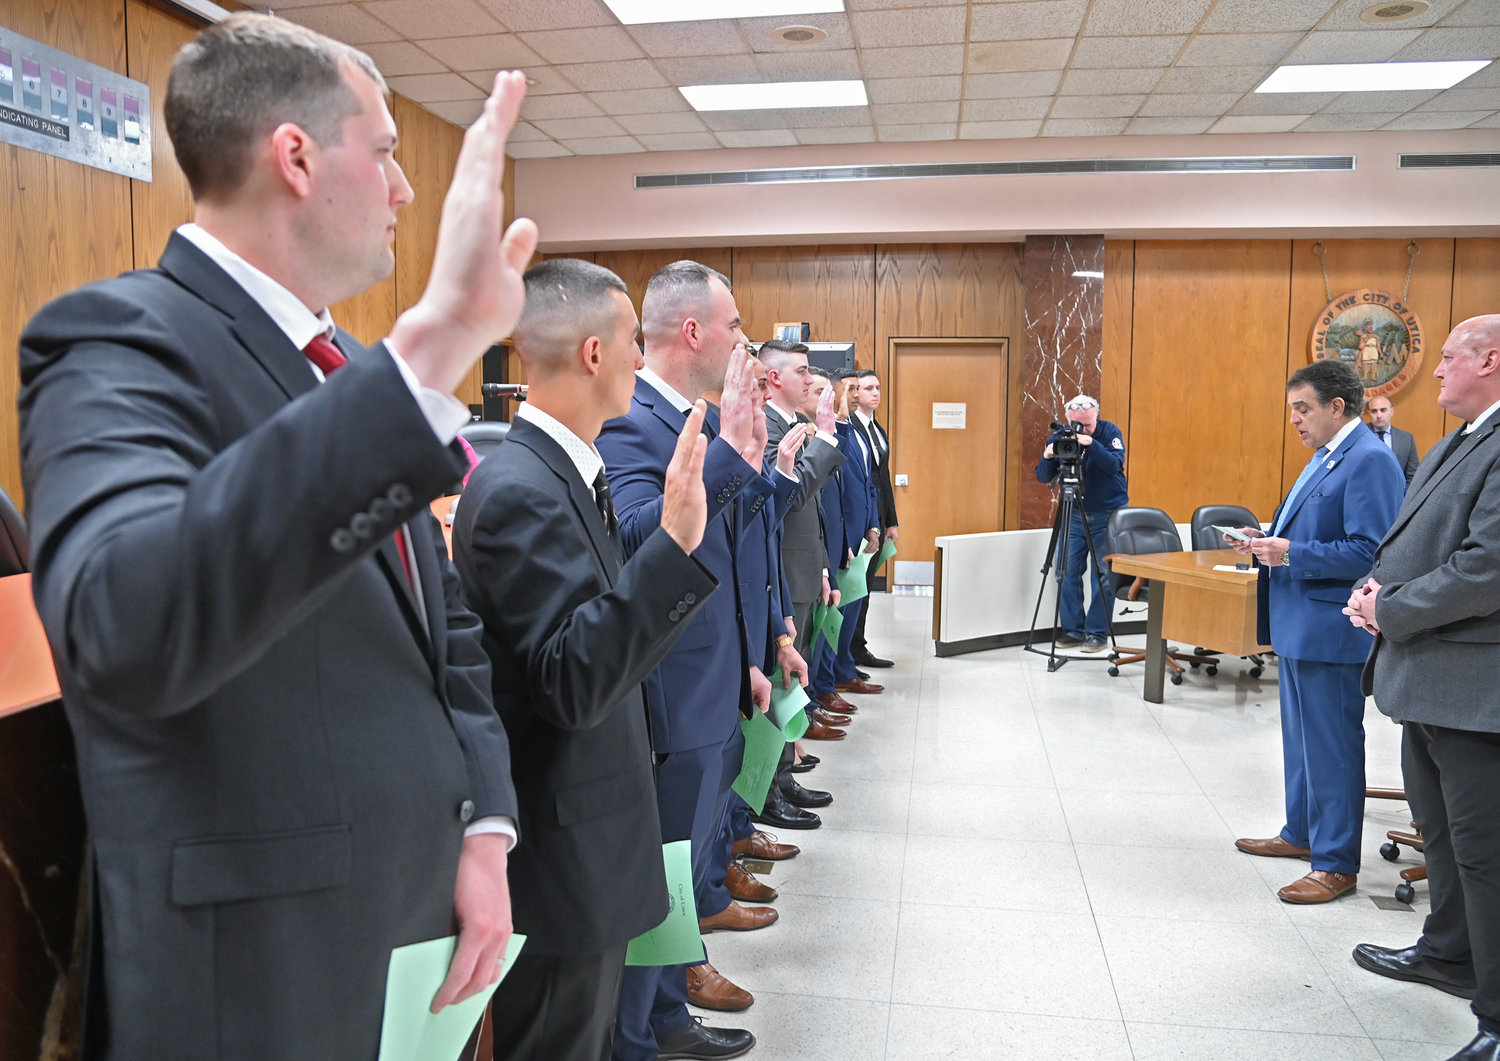 SWEARING IN — Ten new police officer recruits take their oath of office at Utica City Hall on Friday morning.